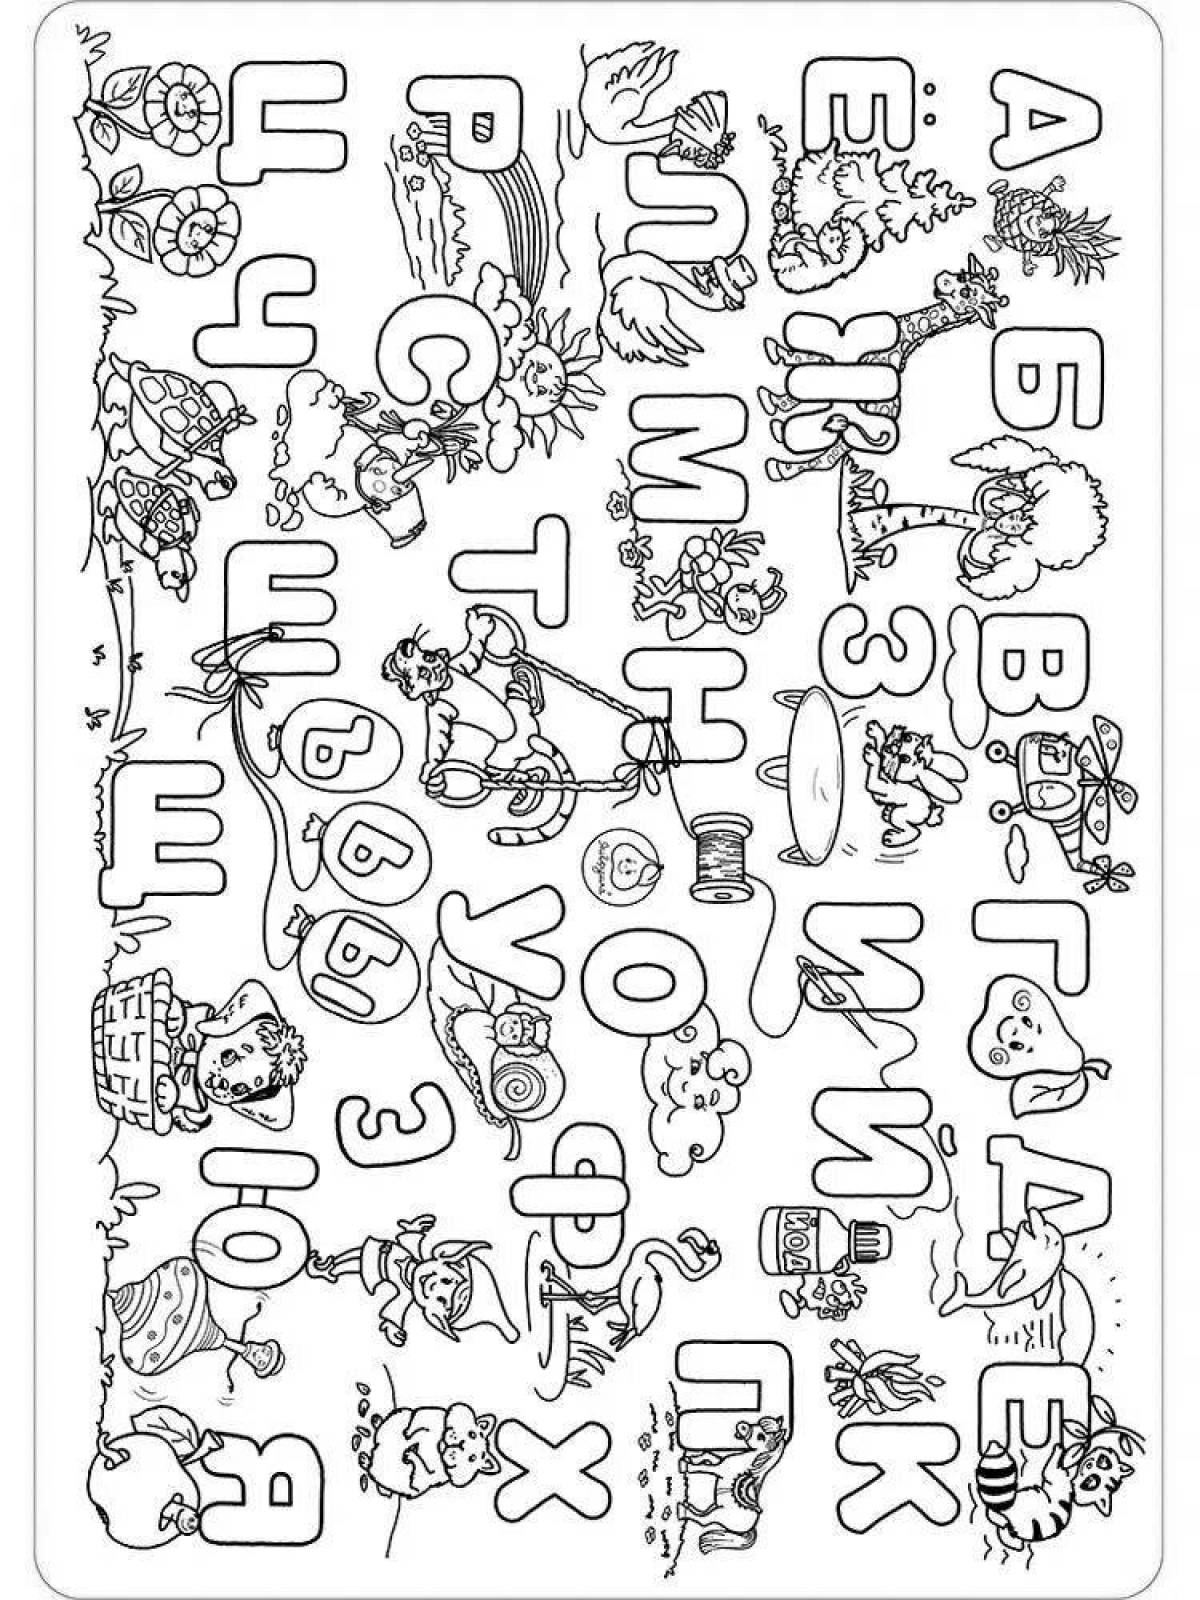 Charming russian letter coloring book